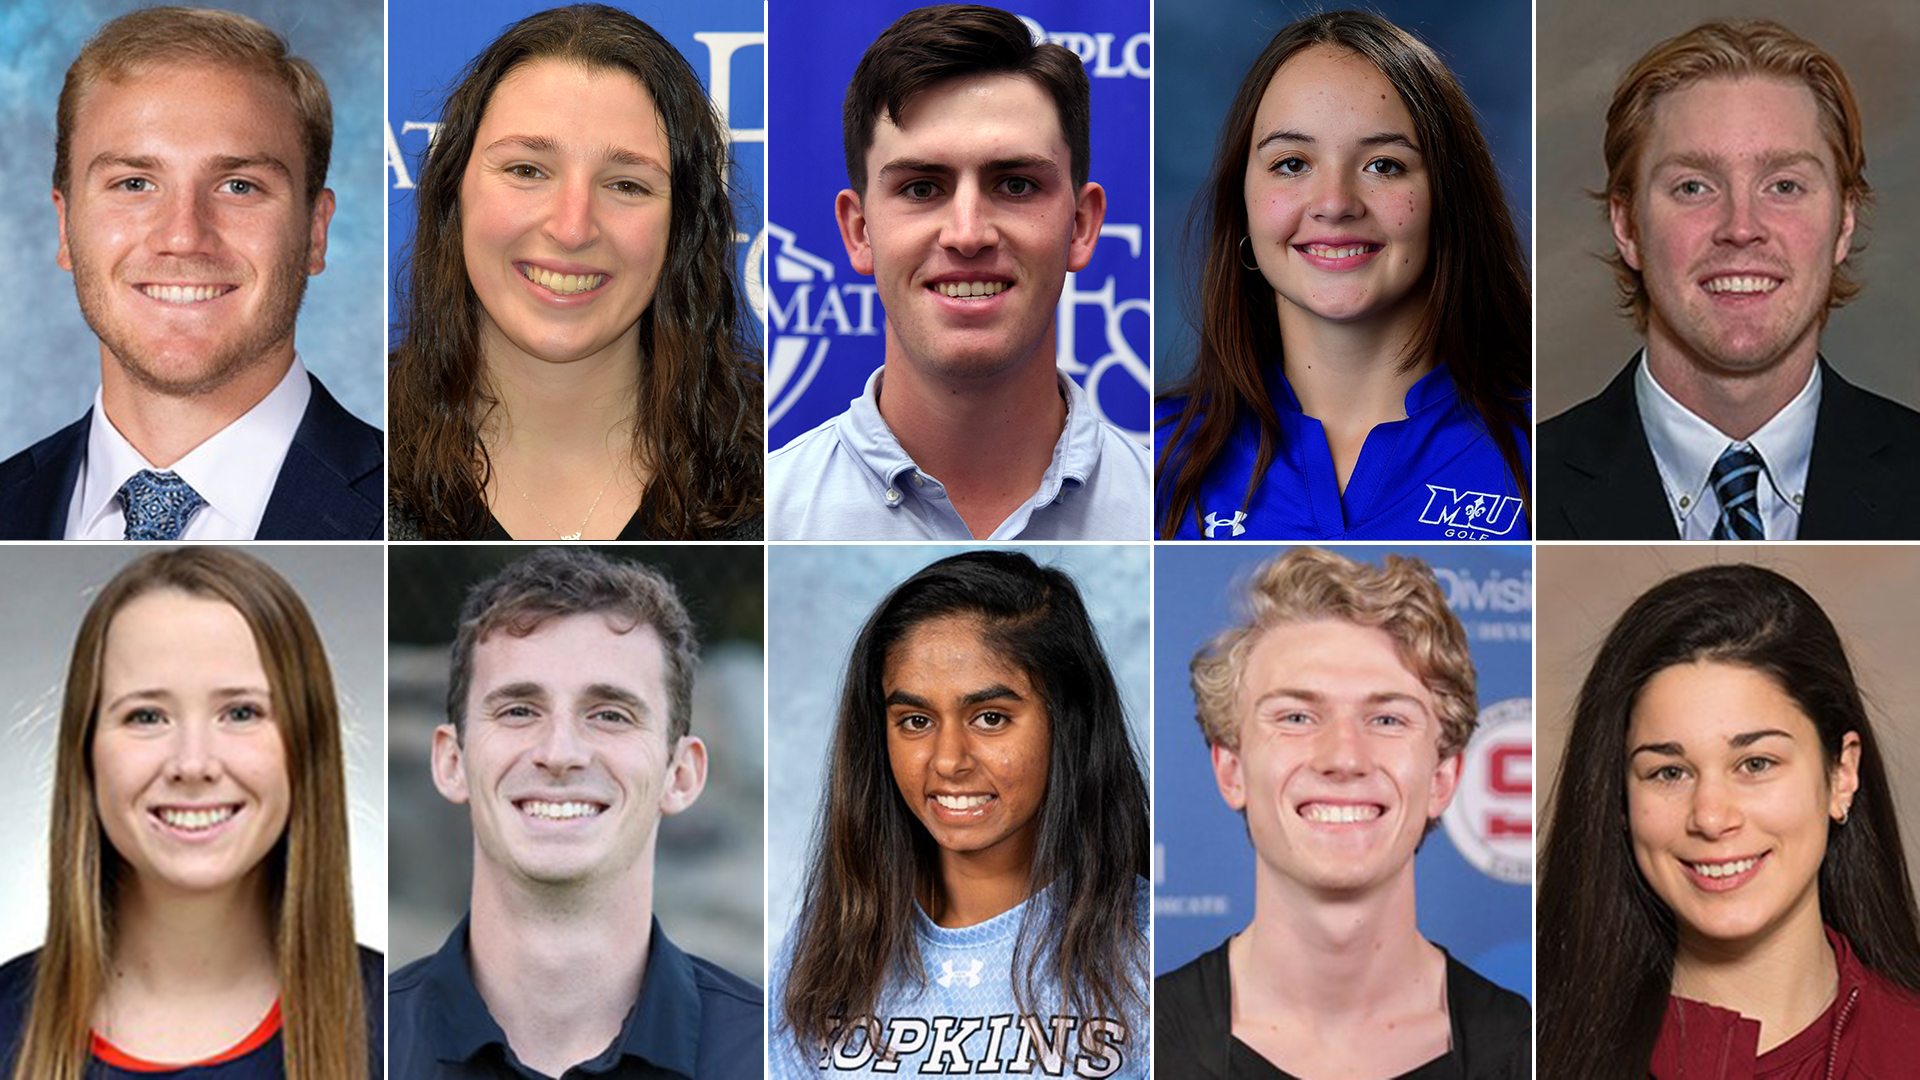 Centennial Conference Announces Spring Academic Honors